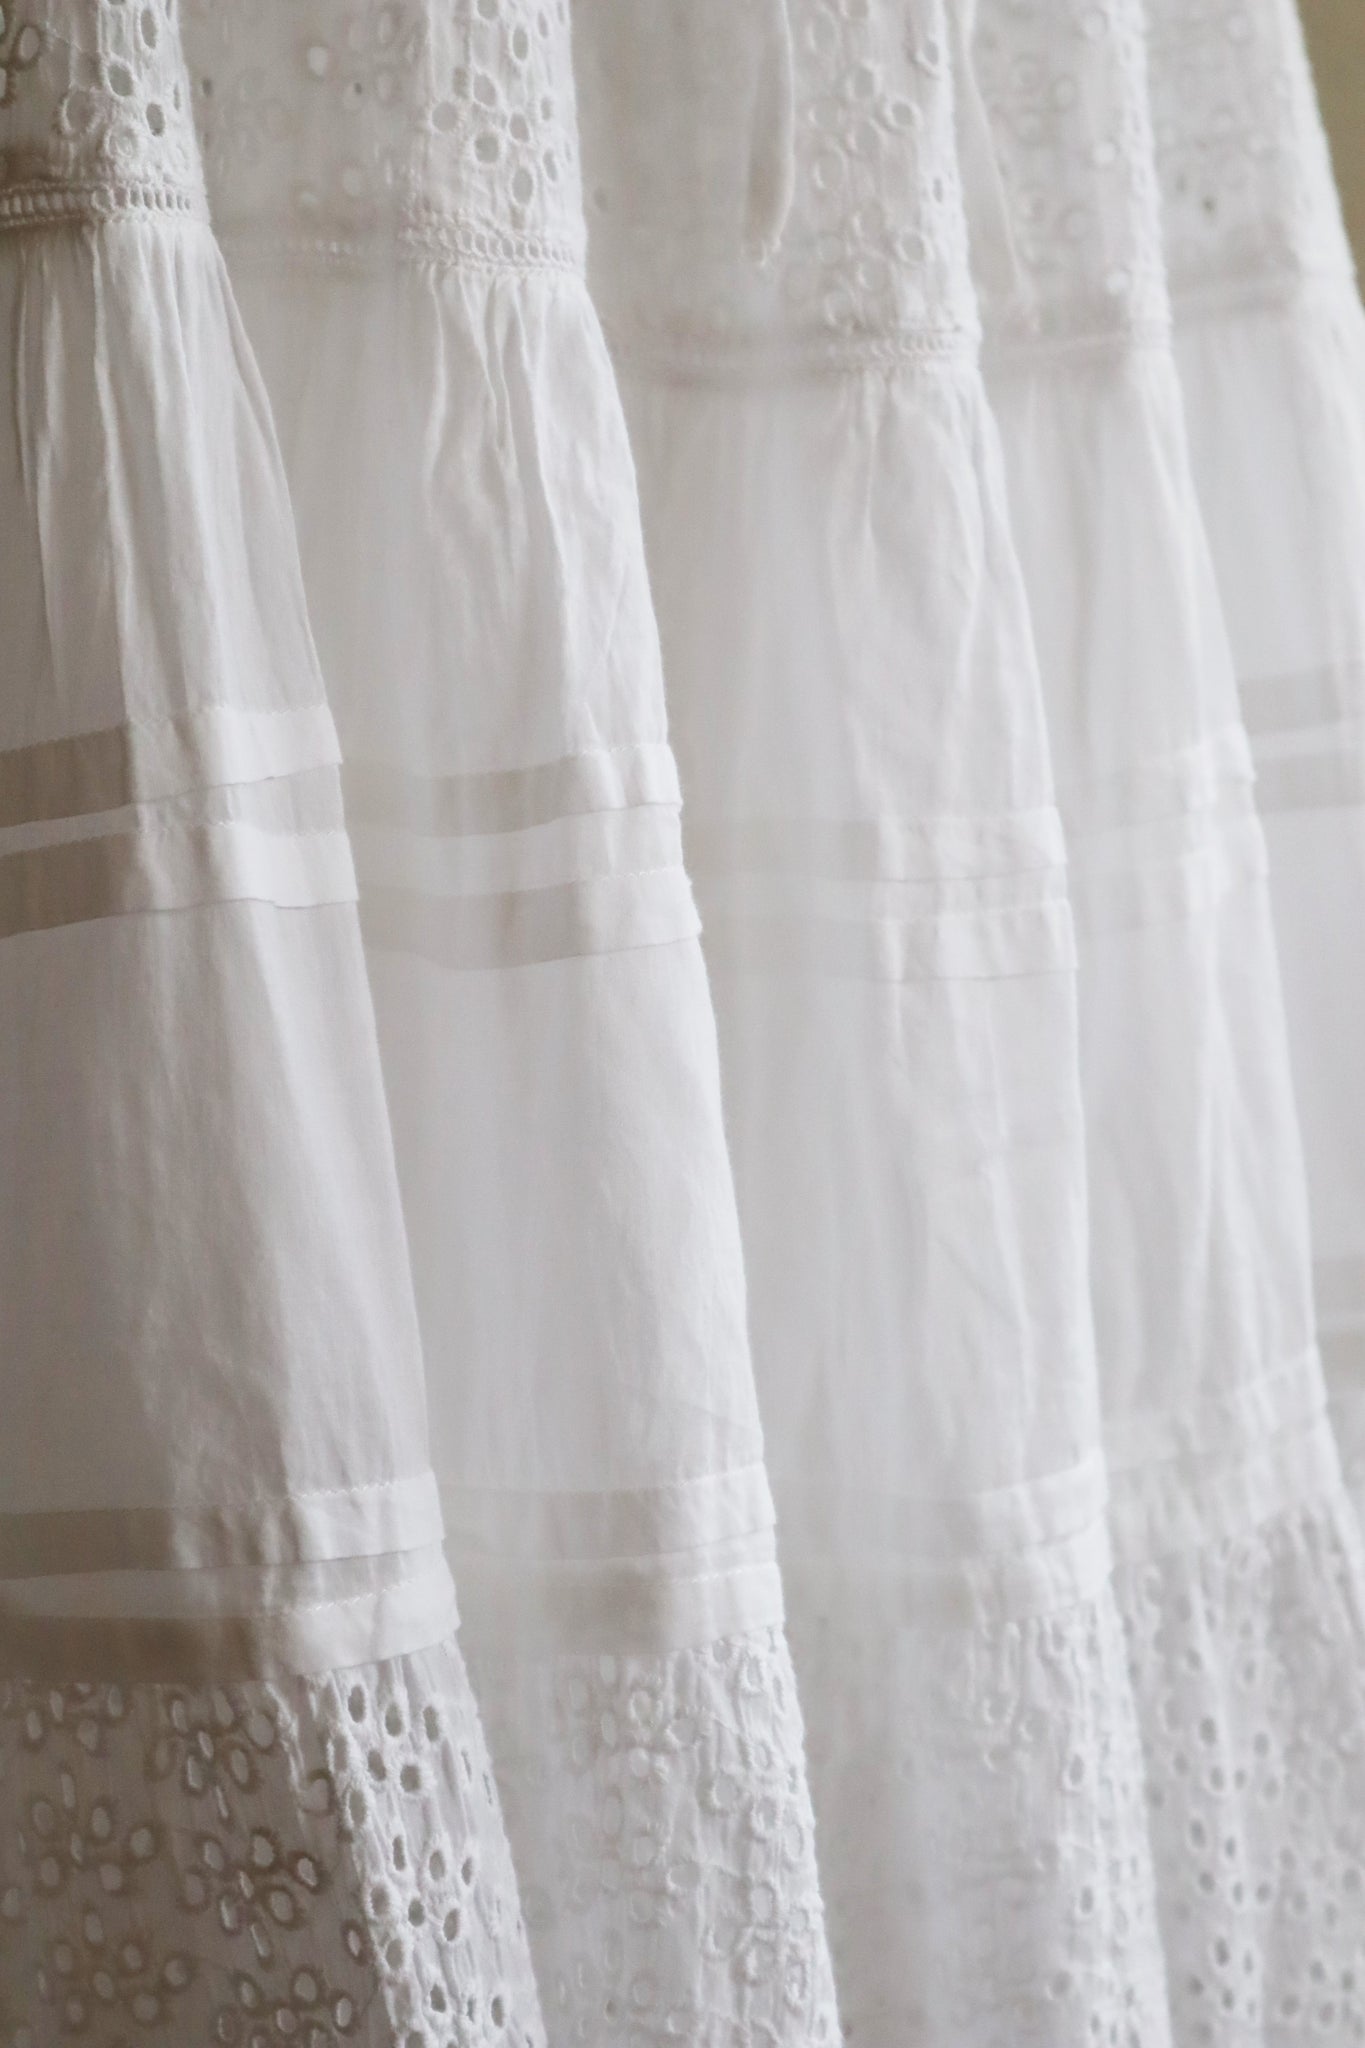 White Cutwork Cotton Lace Skirt